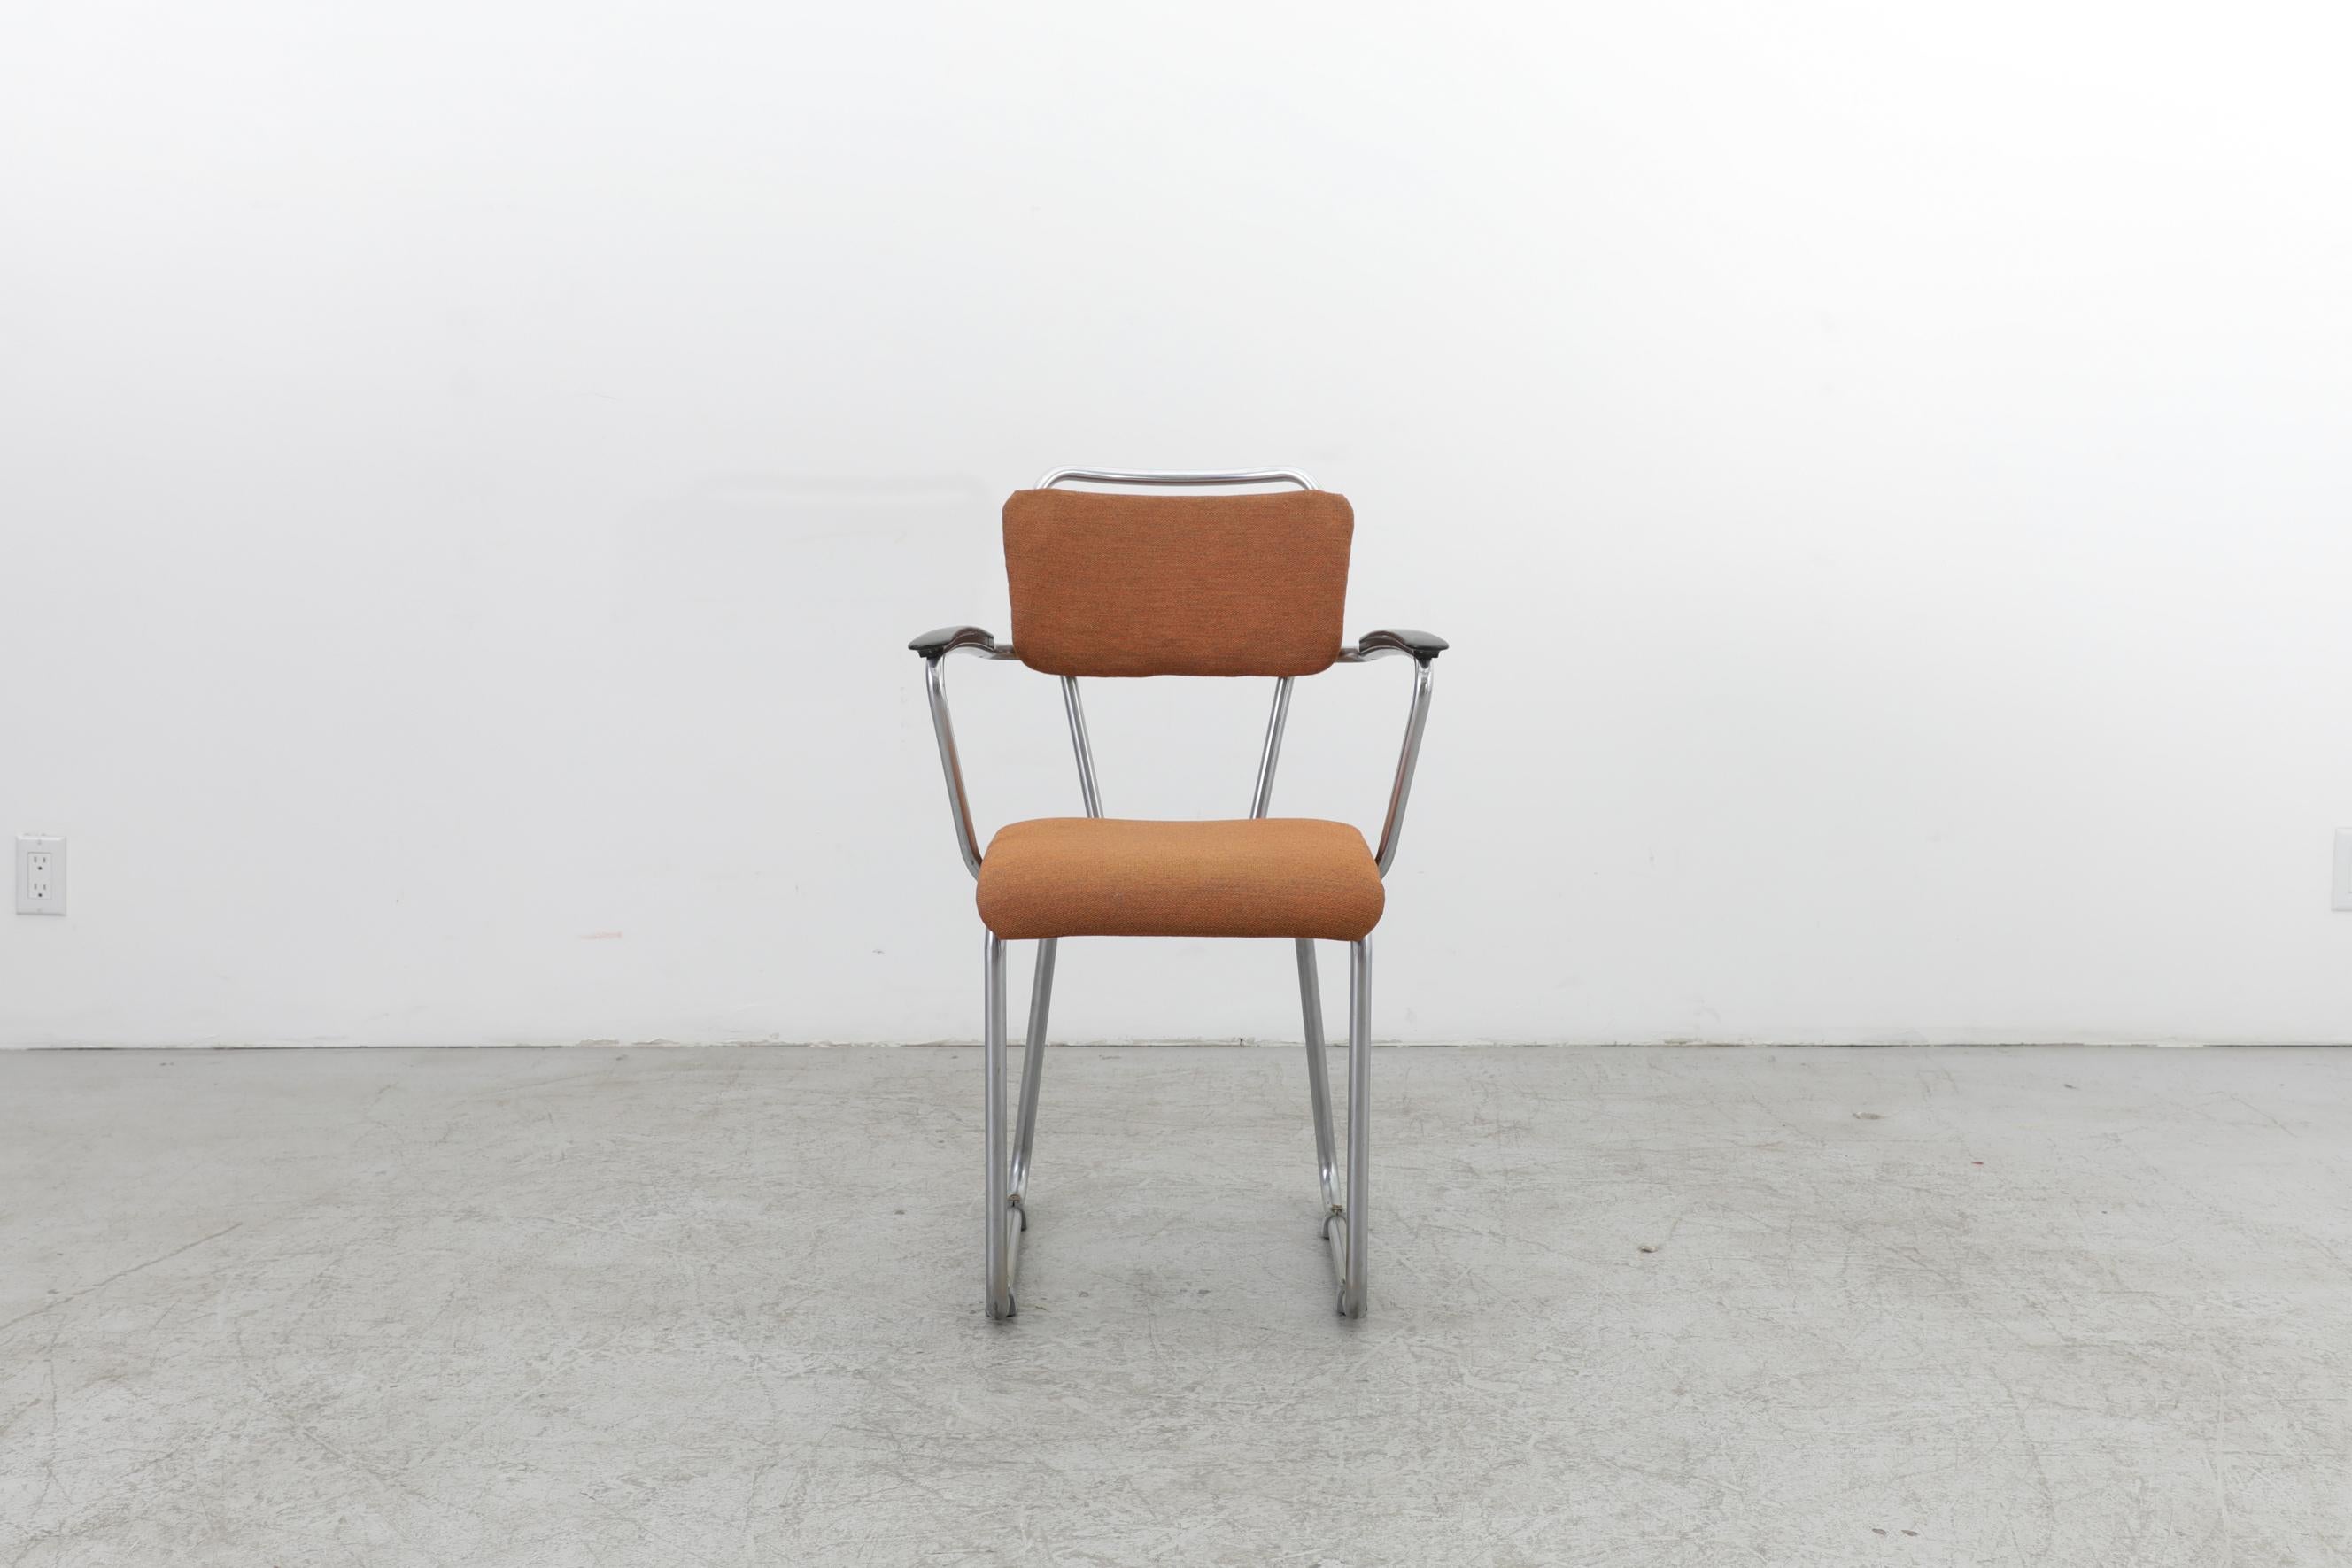 Early edition Gispen 214 desk chair with armrests designed by Christoffel Hoffmann for Gispen in 1950. With a tubular steel frame, original burnt orange upholstery and bakelite arm rests. In original condition with fading to the upholstery as well